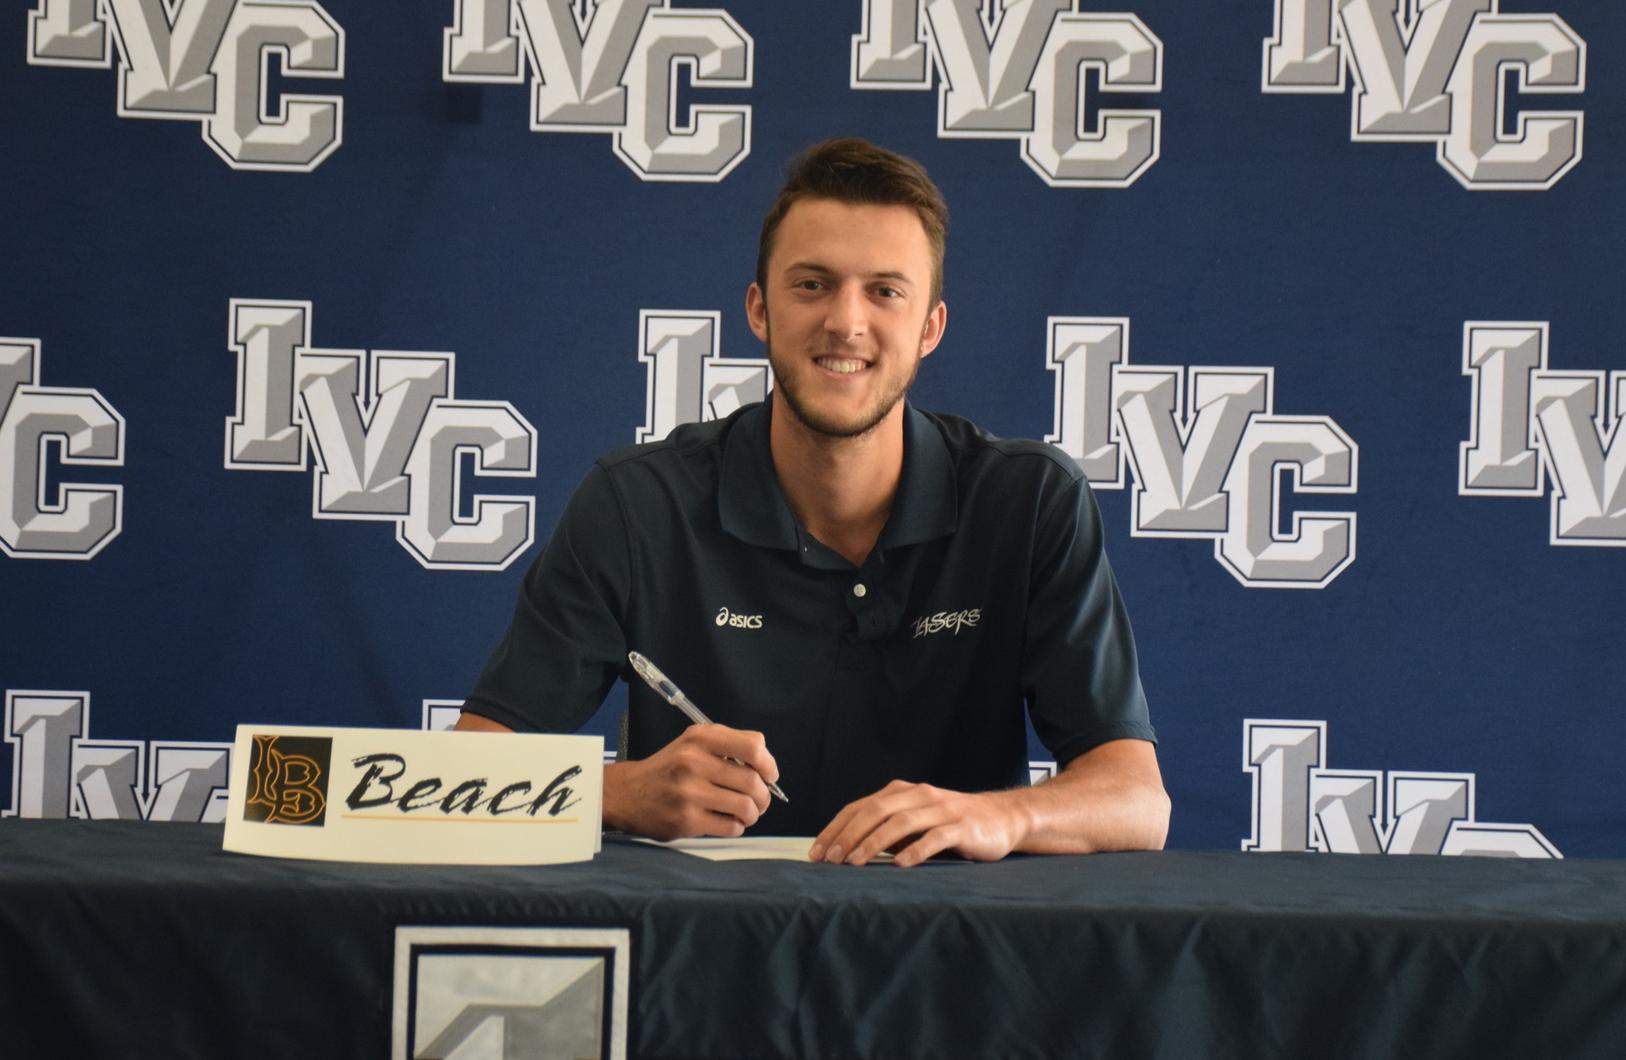 Volleyball player Grant Marocchi signs with defending champs